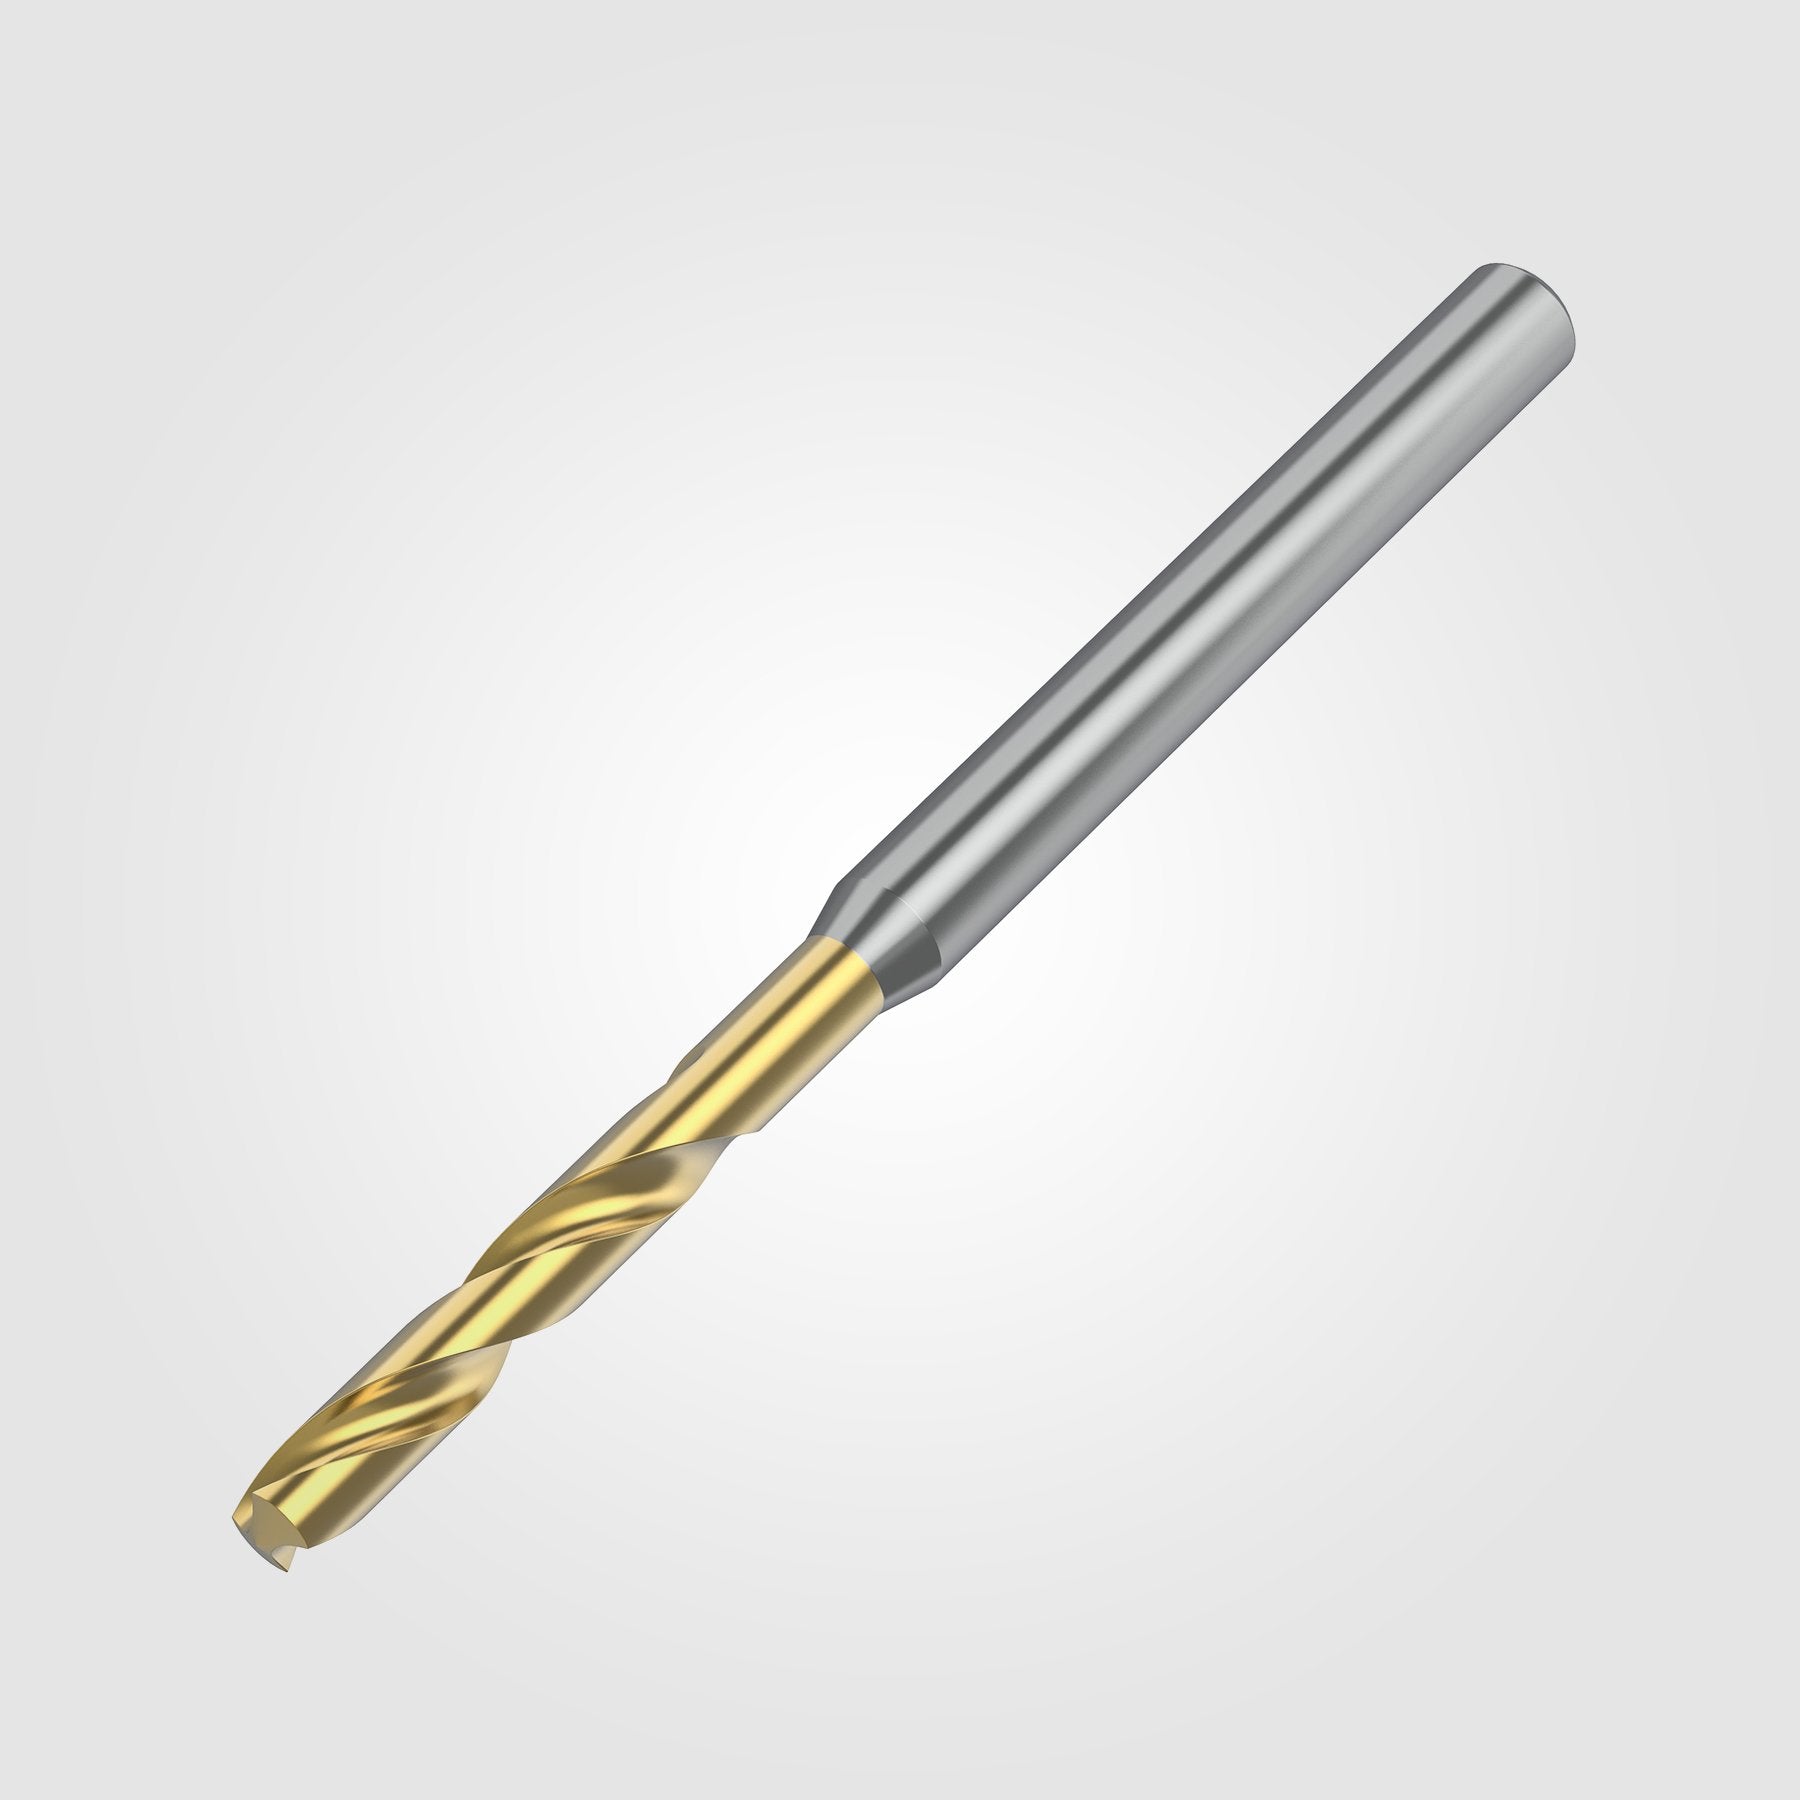 GOdrill (THROUGH COOLANT) | 6.4mm / .2520" / 3xD | SOLID CARBIDE DRILL | 4151153